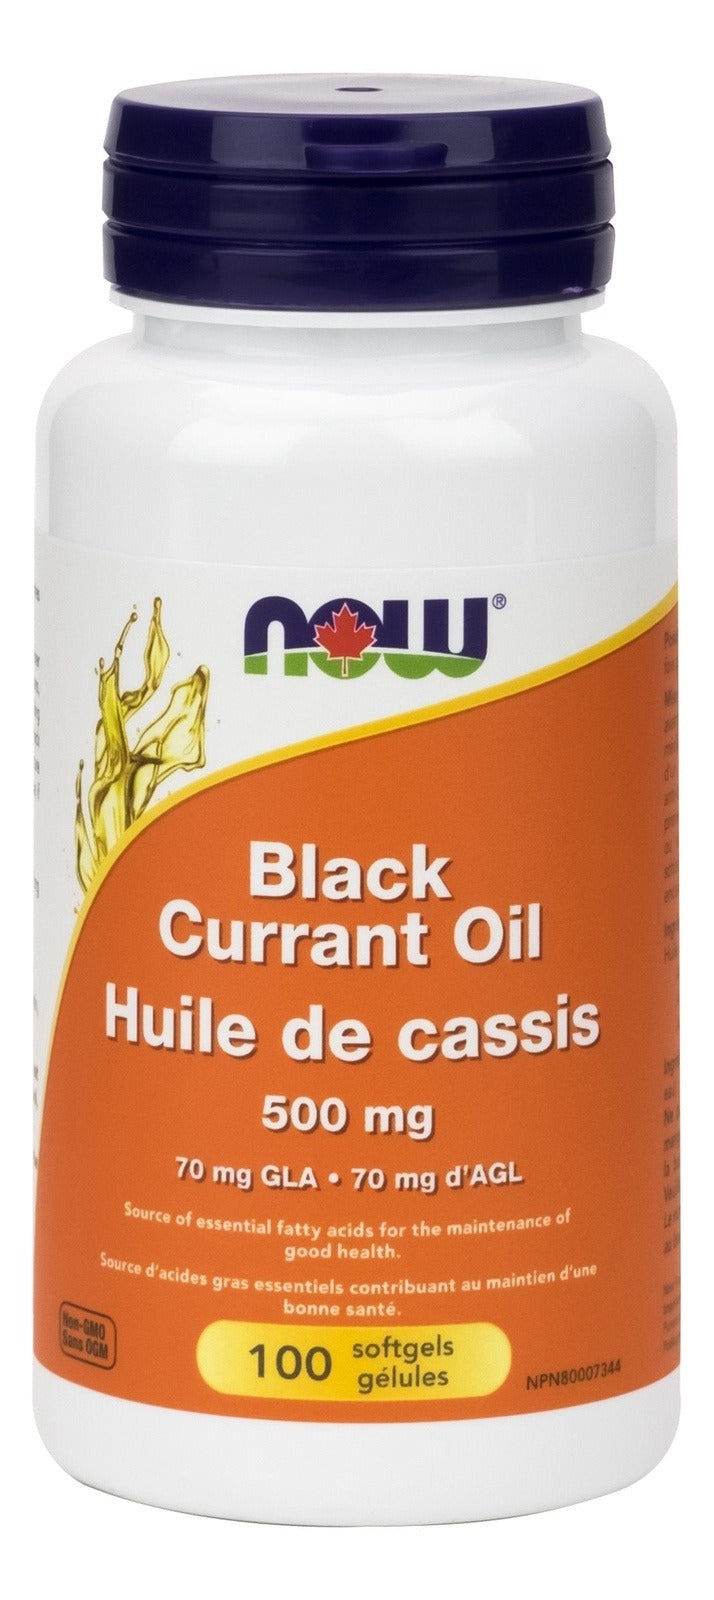 NOW Black Currant Oil 500 mg with GLA 100 Softgels Image 1